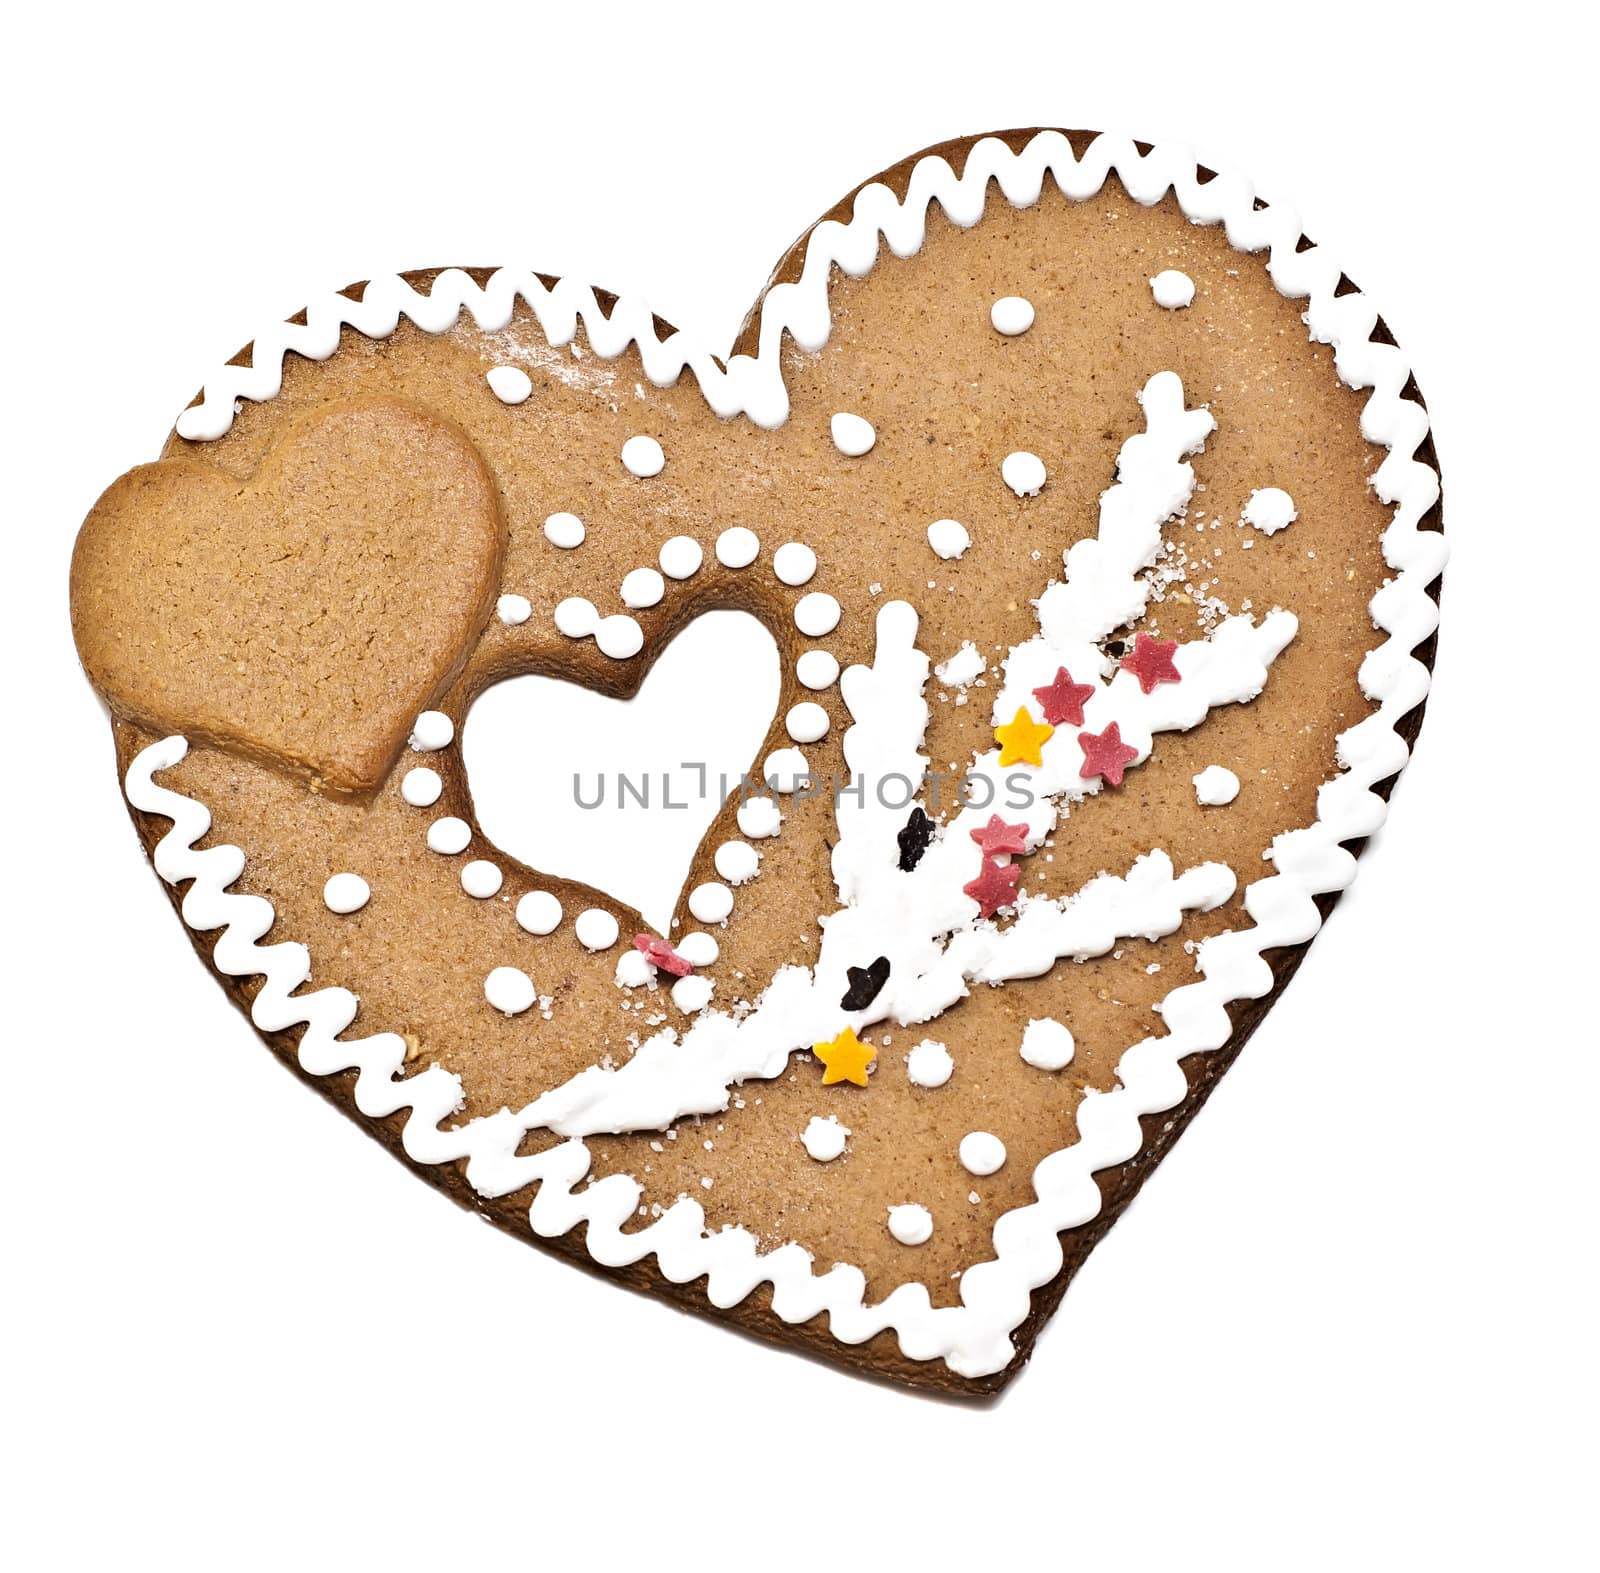 Gingerbread decoration. by gitusik